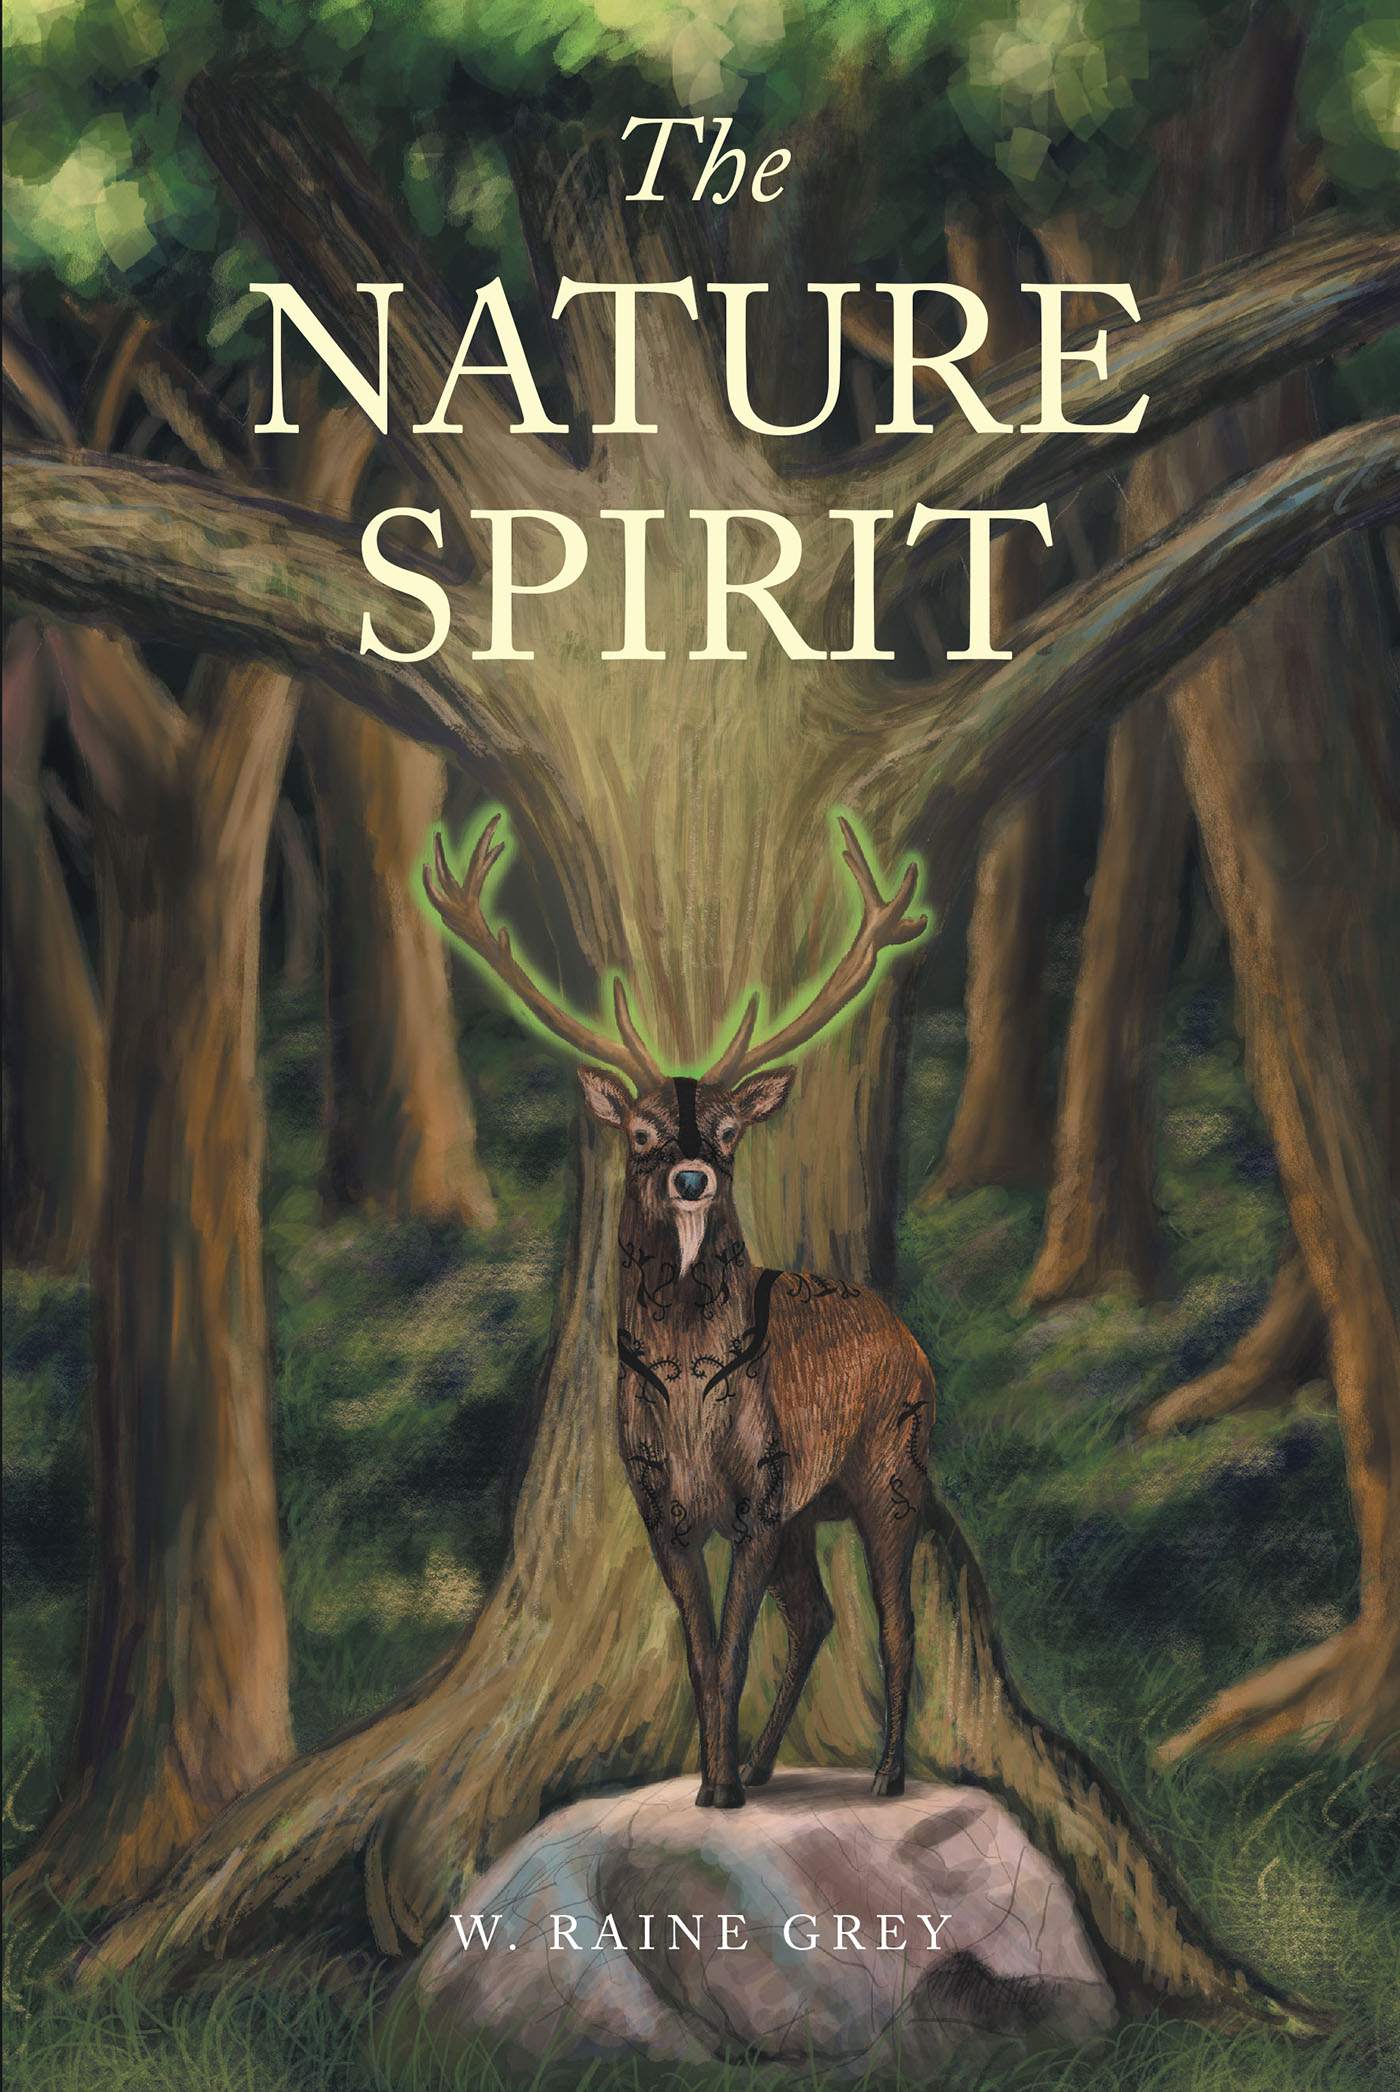 Author W. Raine Grey’s New Book, "The Nature Spirit," Introduces Aloicius, an Immortal Nature Spirit, Who Has Protected His Homeland for Over a Thousand Years